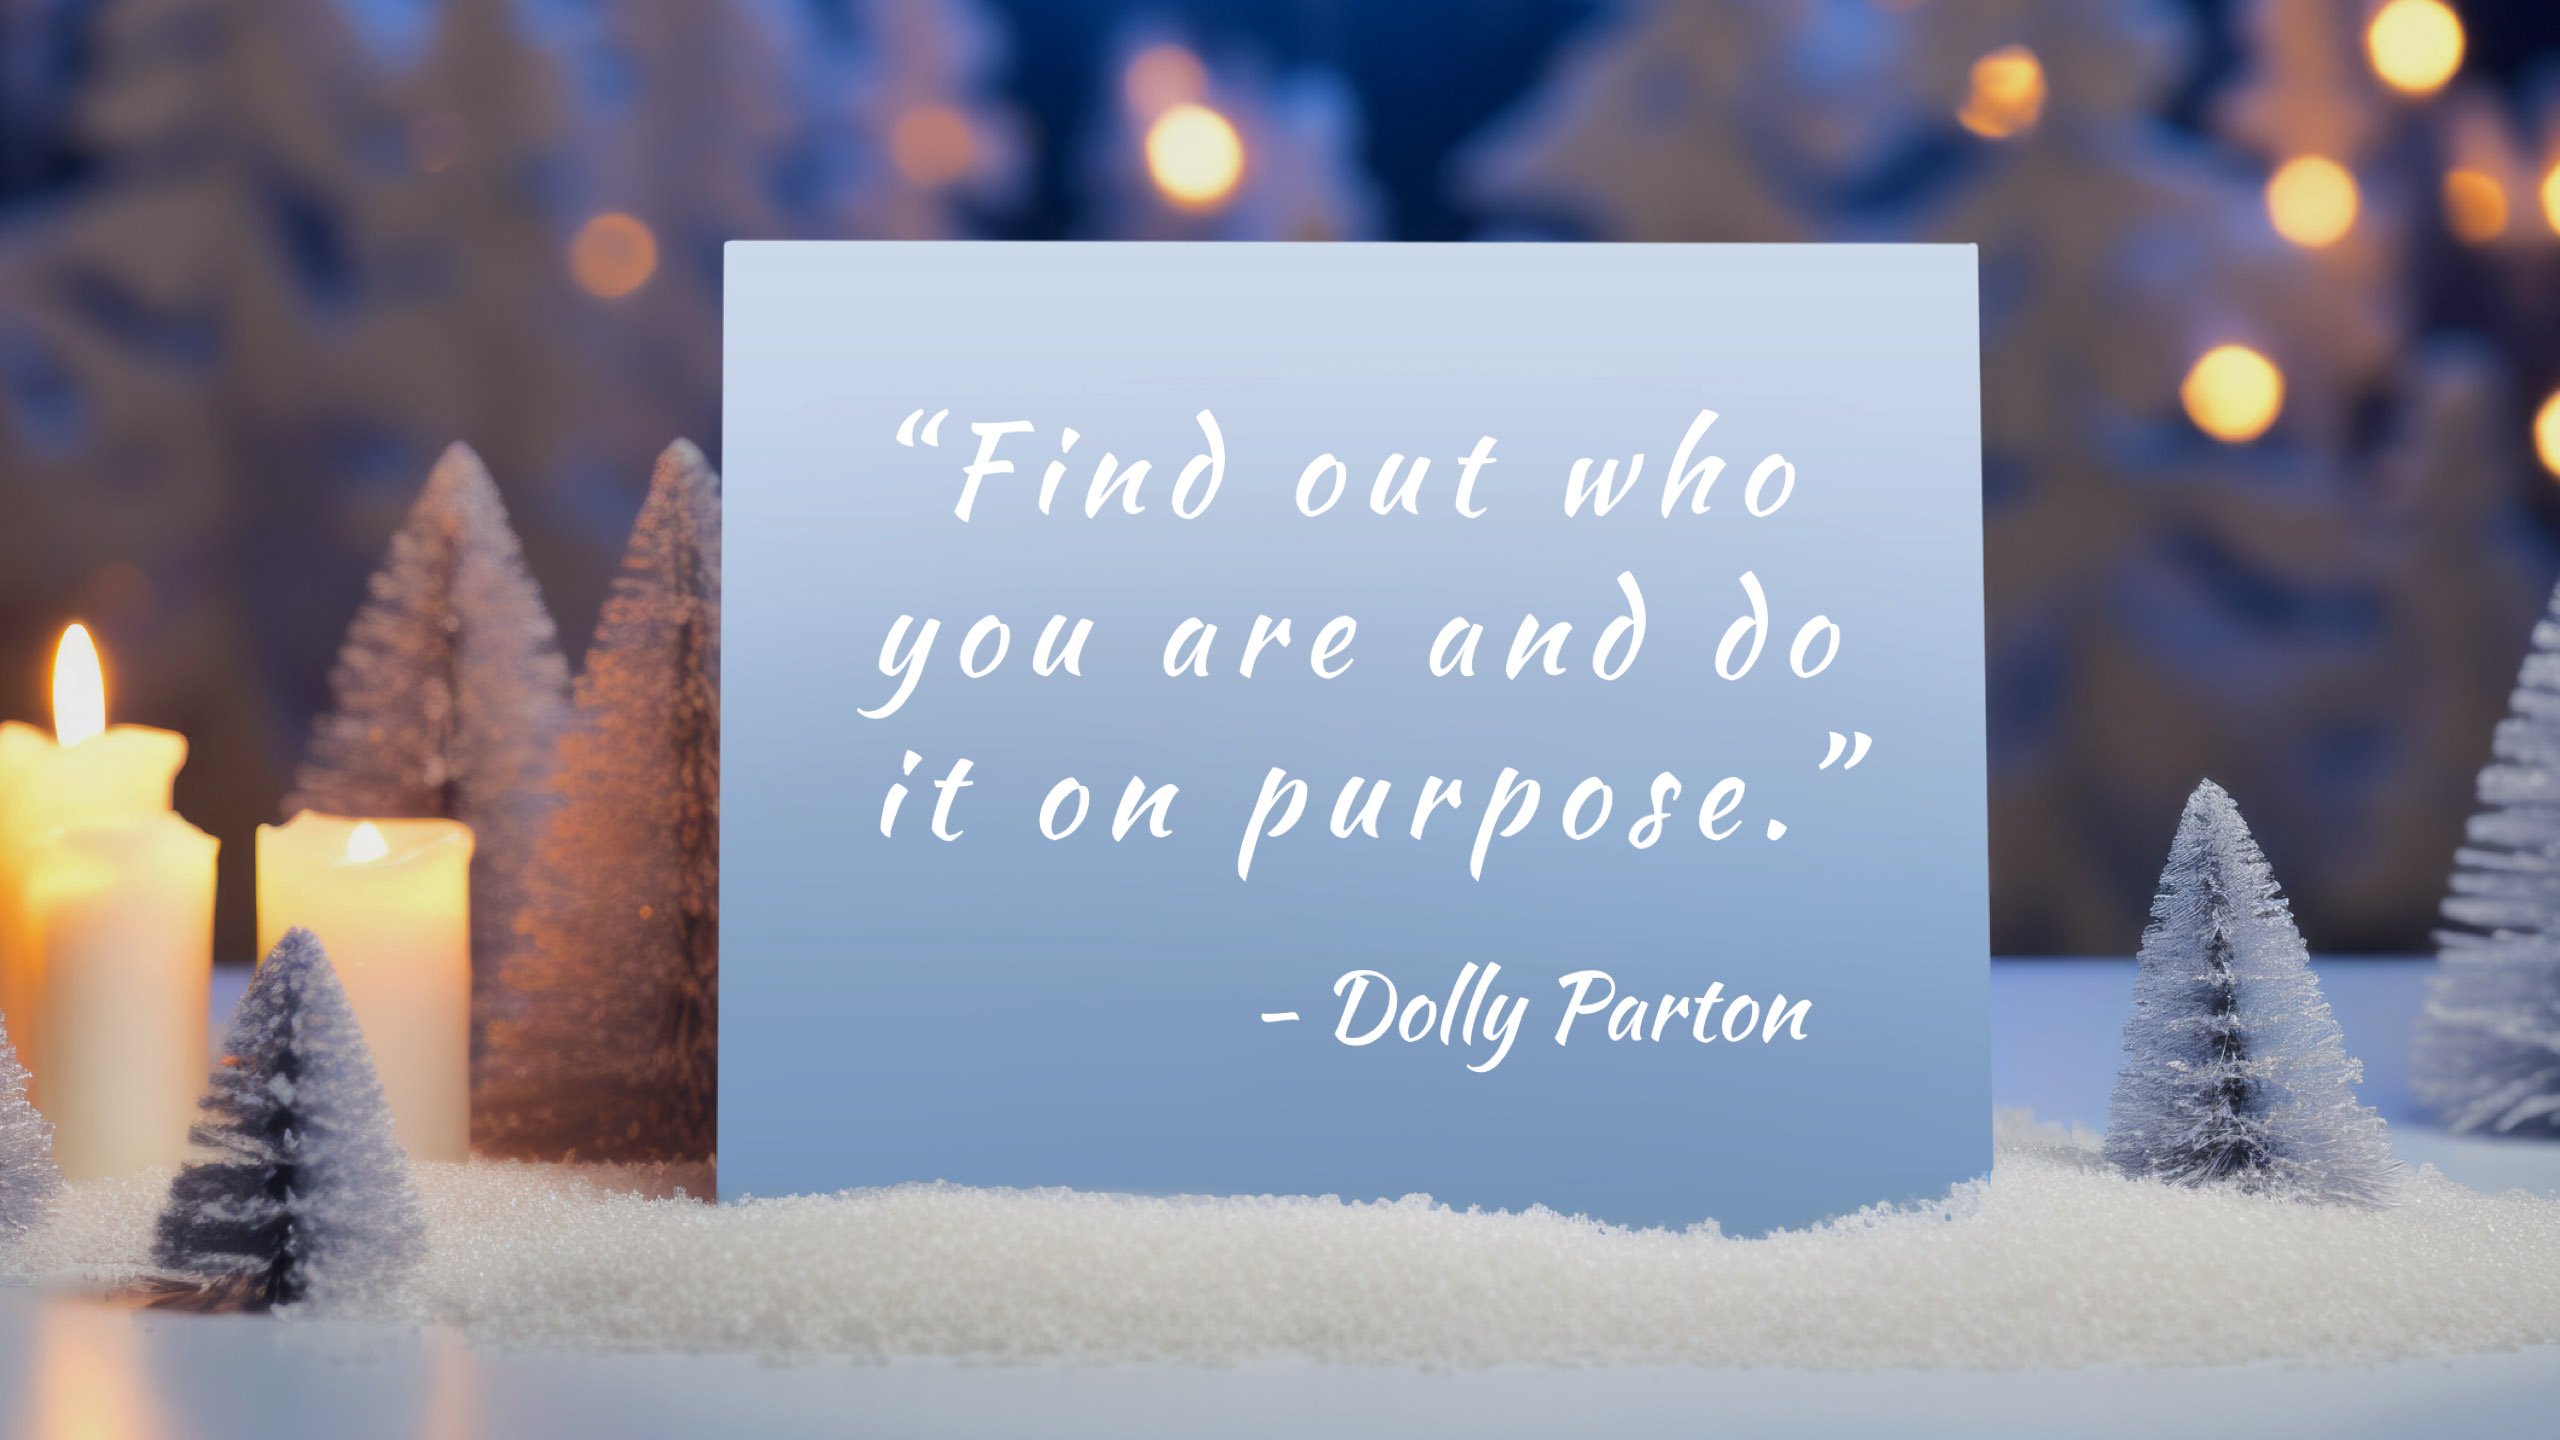 Quote by Dolly Parton 